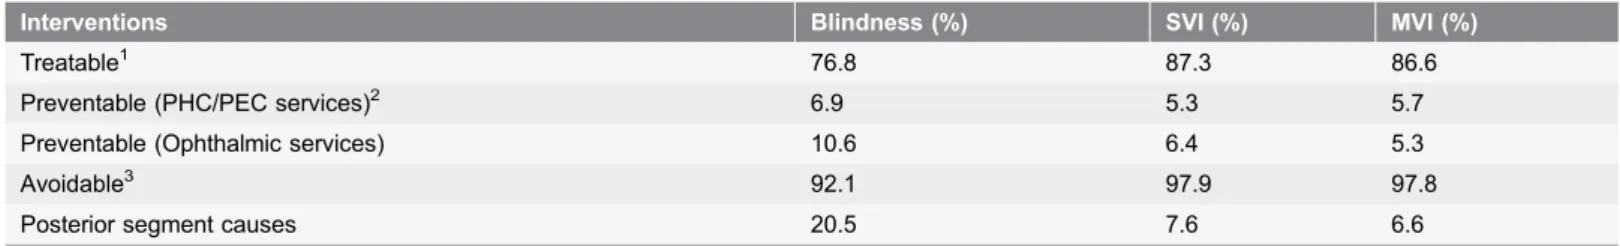 Table 6. Causes of Blindness, SVI, and MVI categorized by possible interventions.